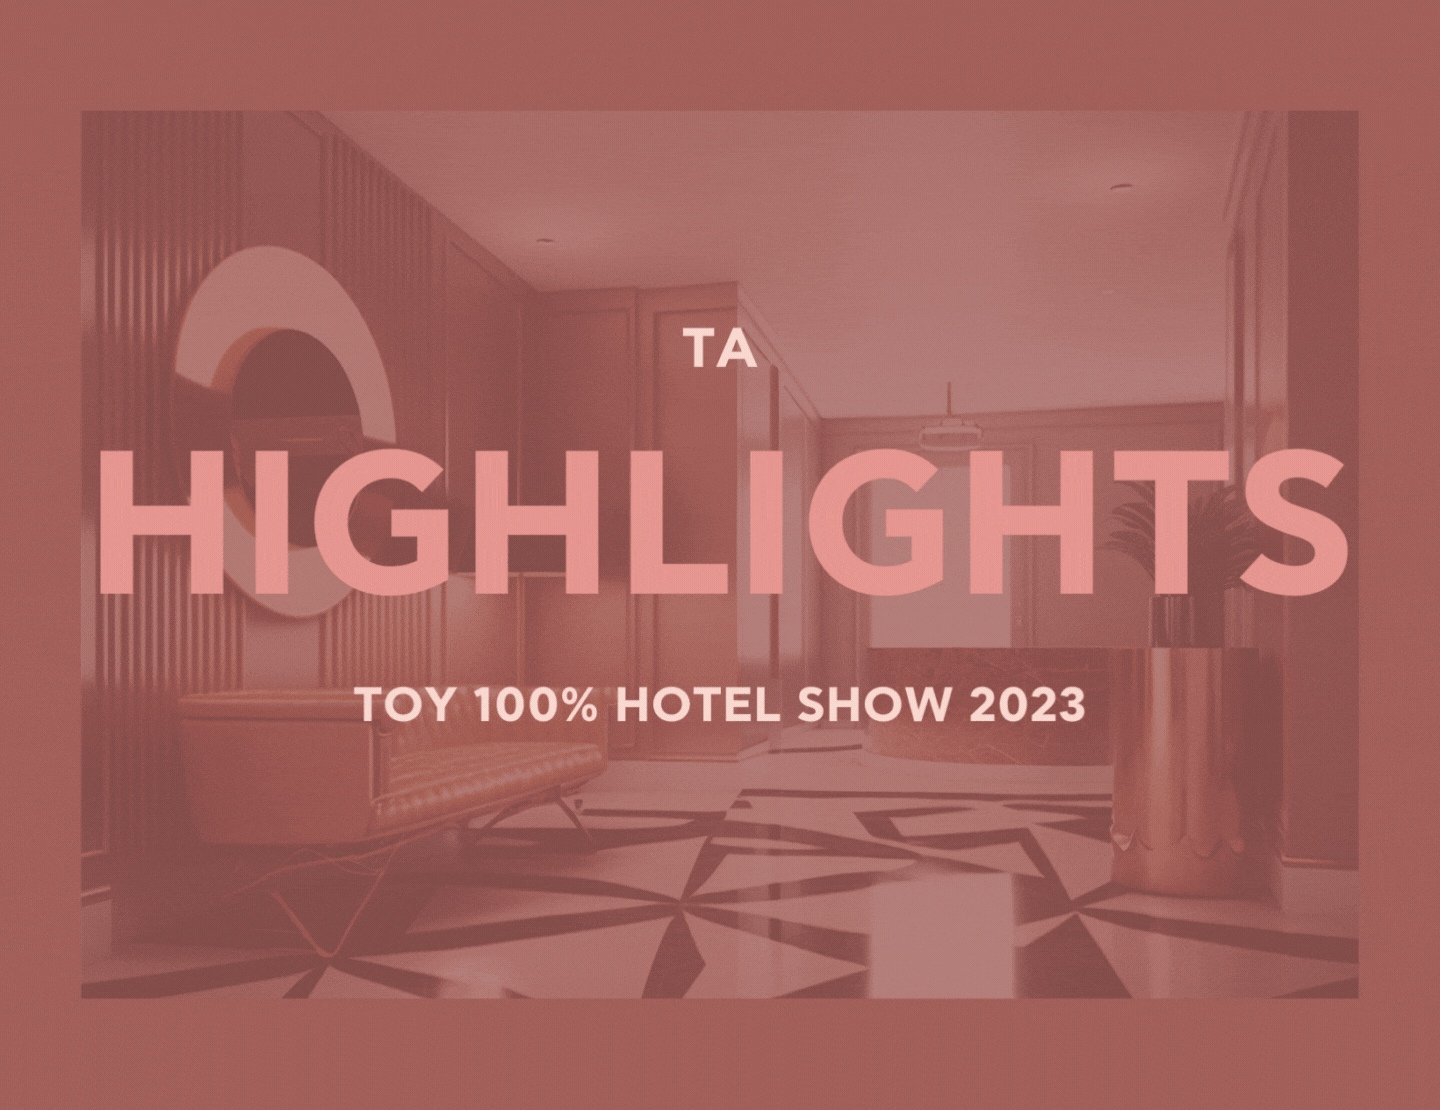 What are the new special areas of the hotel experience that the 100% Hotel Show presents